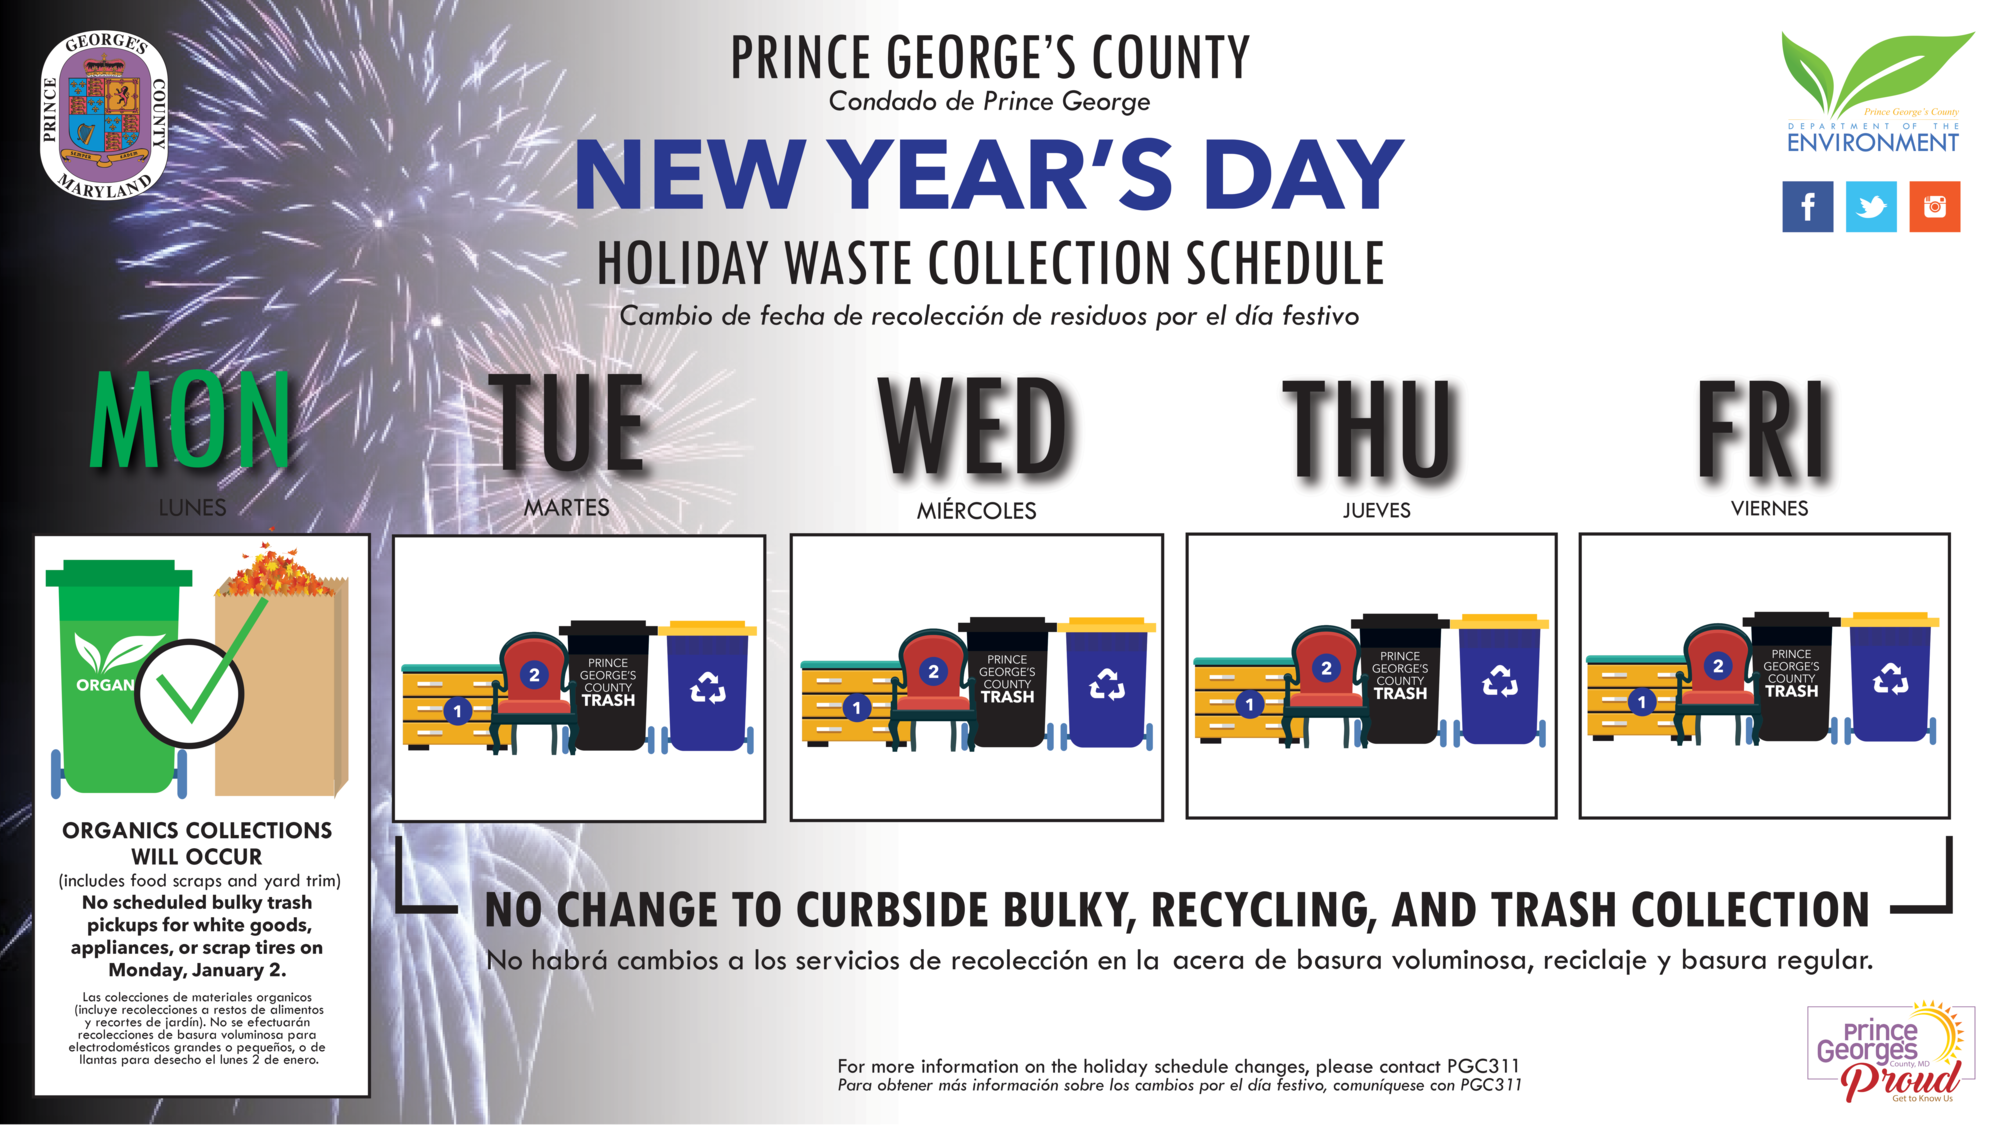 Holiday Waste Collection Schedules